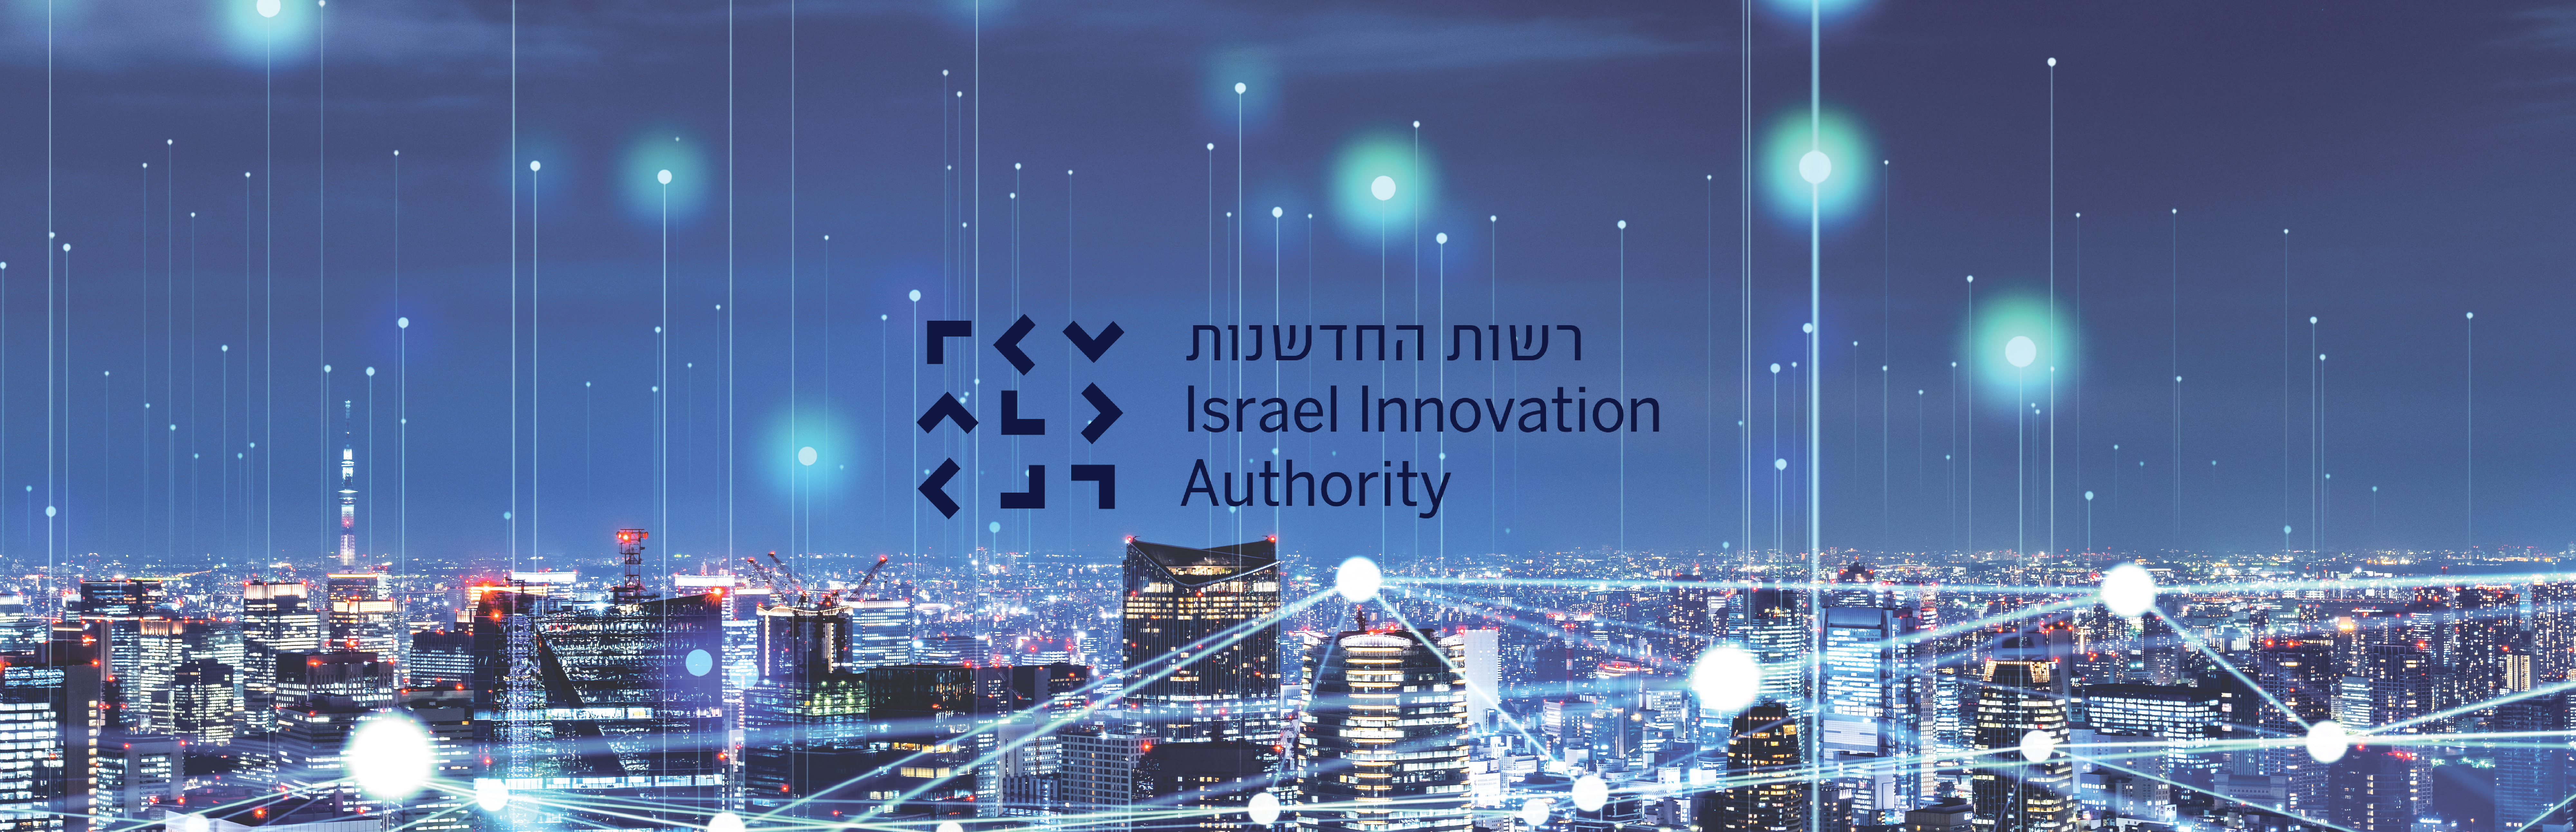 Israel Innovation Authority’s Annual Report